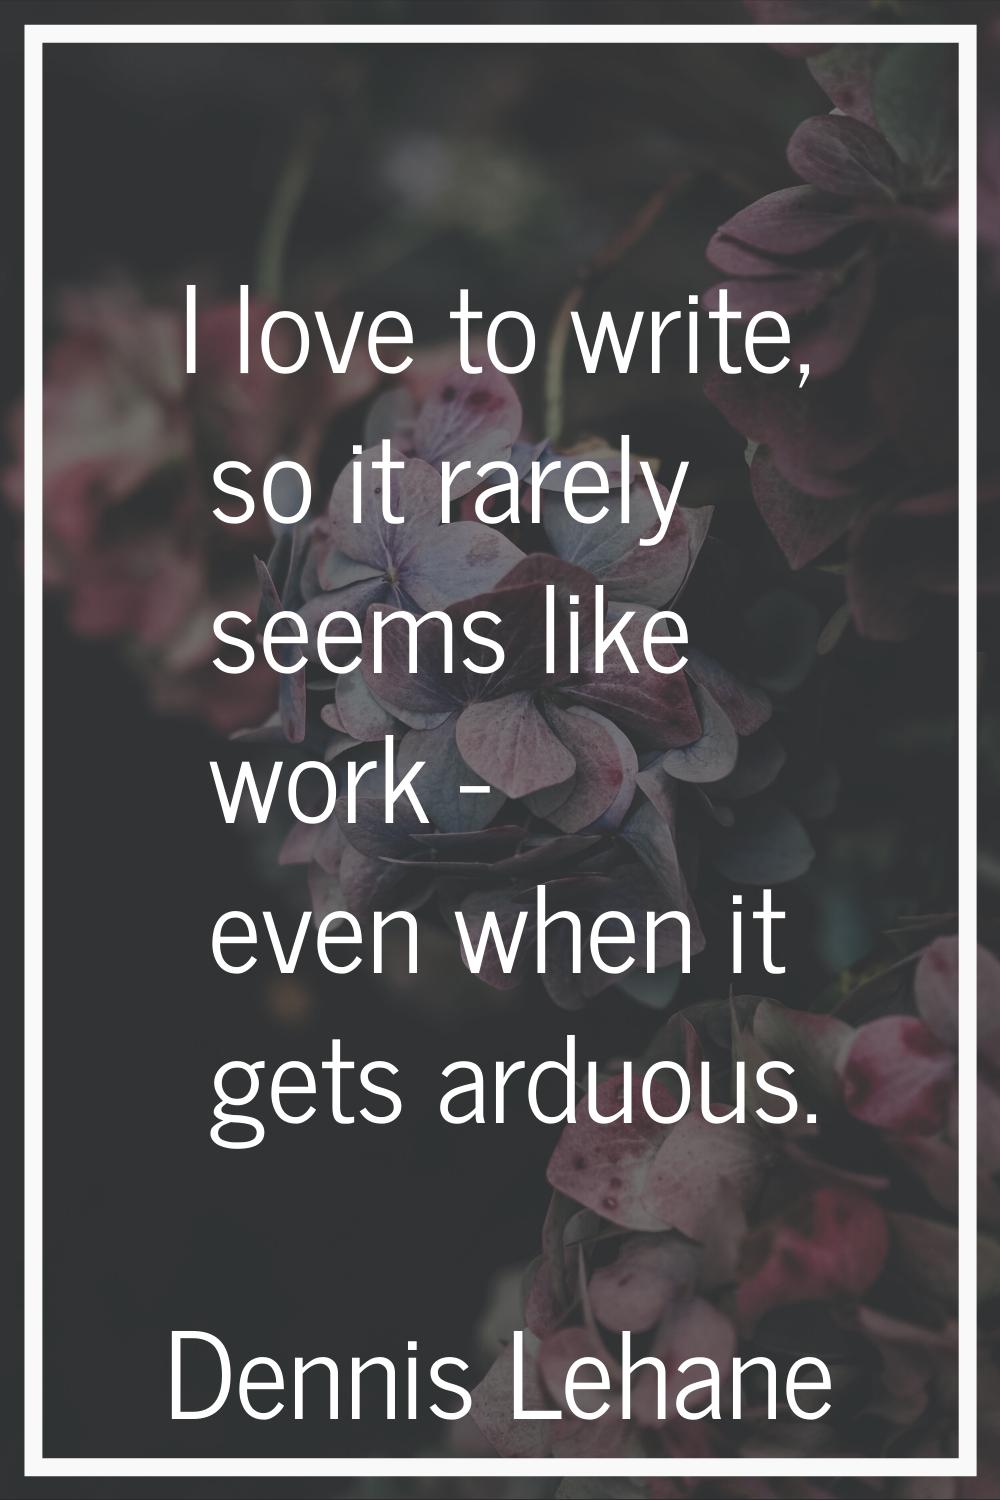 I love to write, so it rarely seems like work - even when it gets arduous.